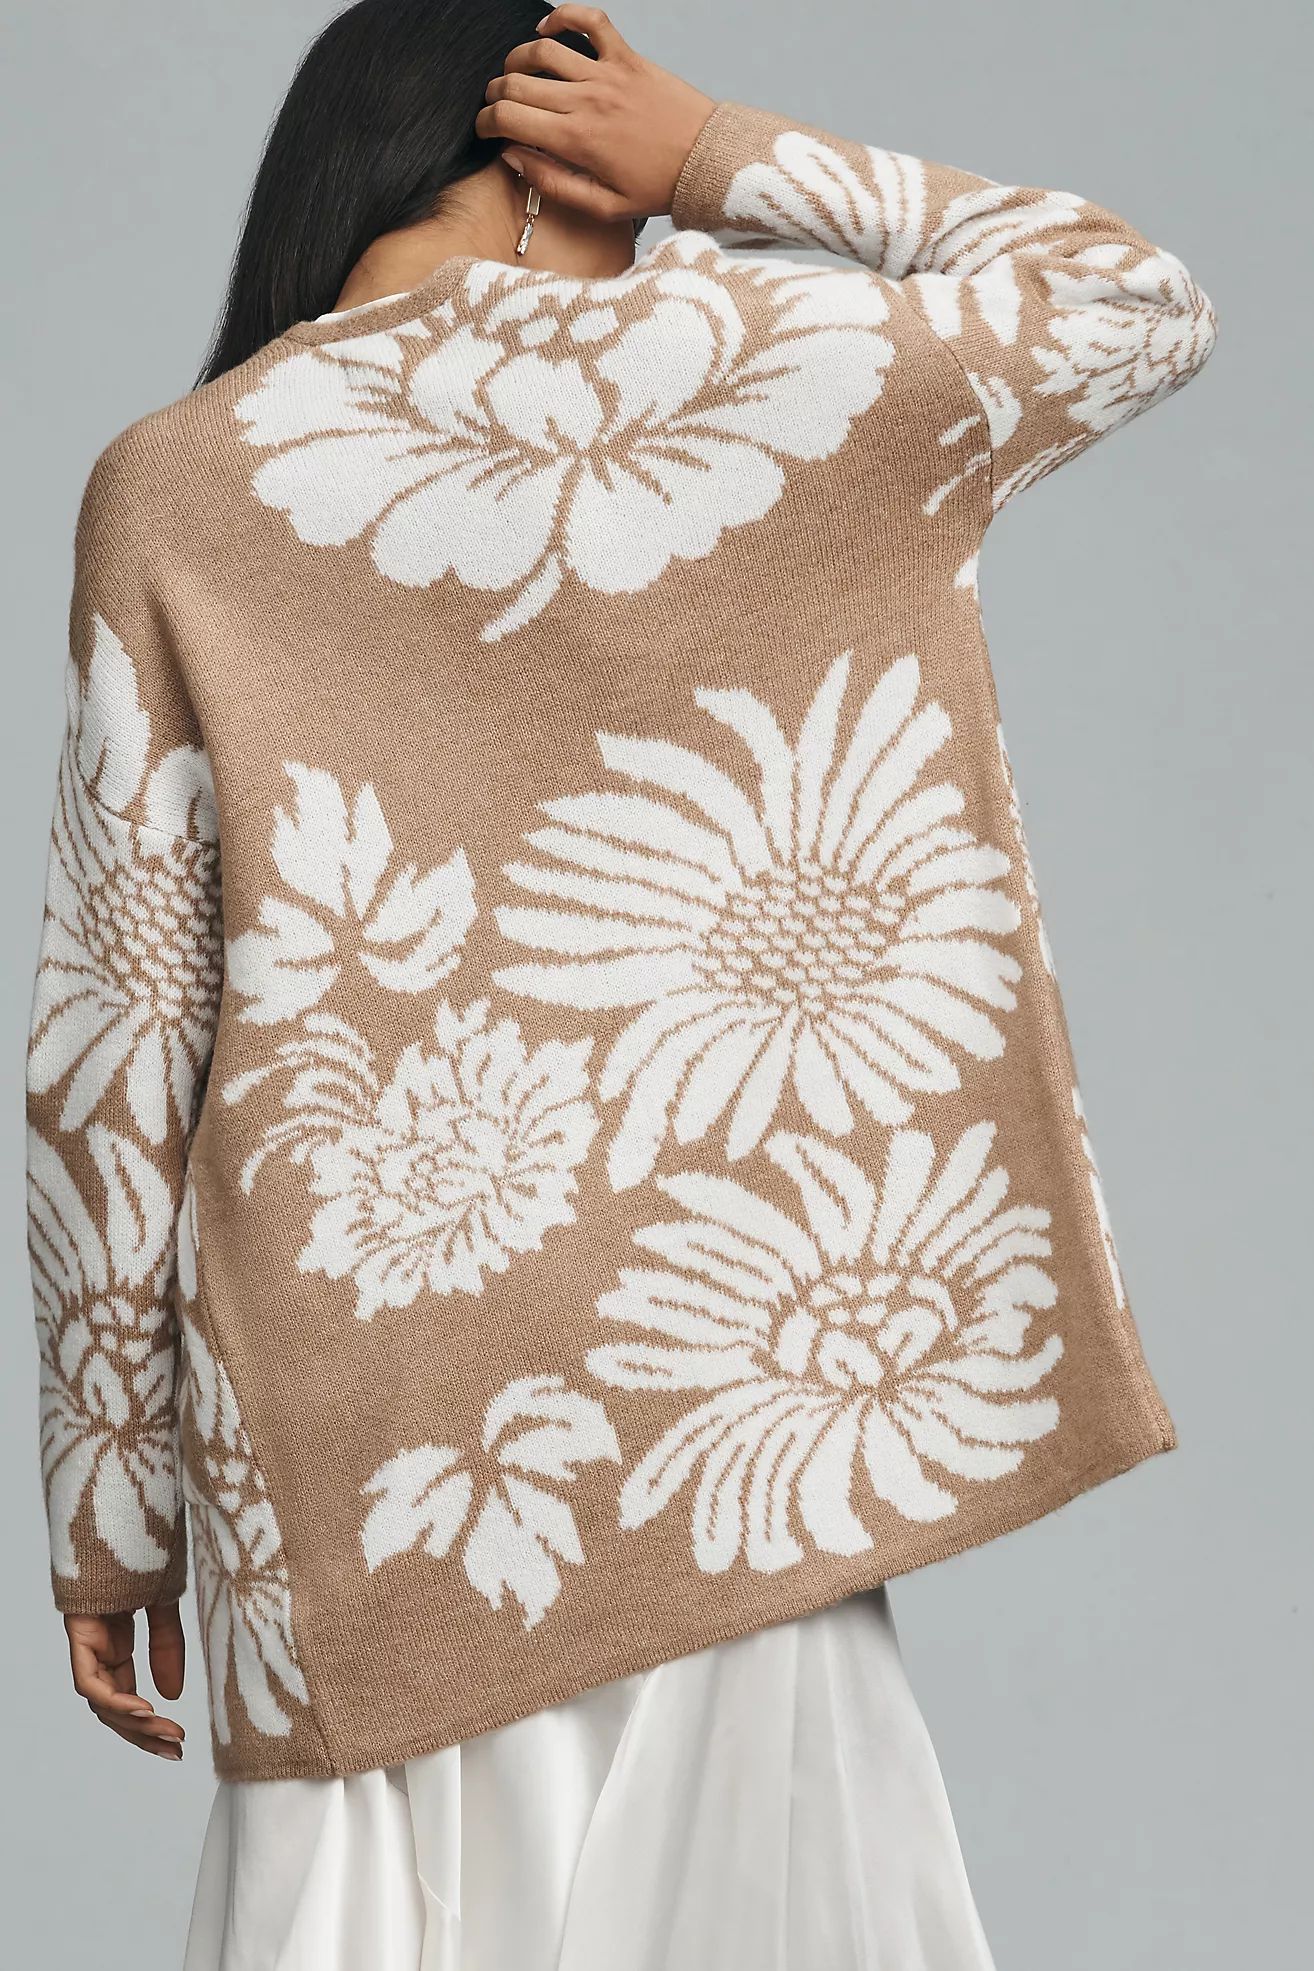 By Anthropologie Patterned Cardigan Sweater | Anthropologie (US)